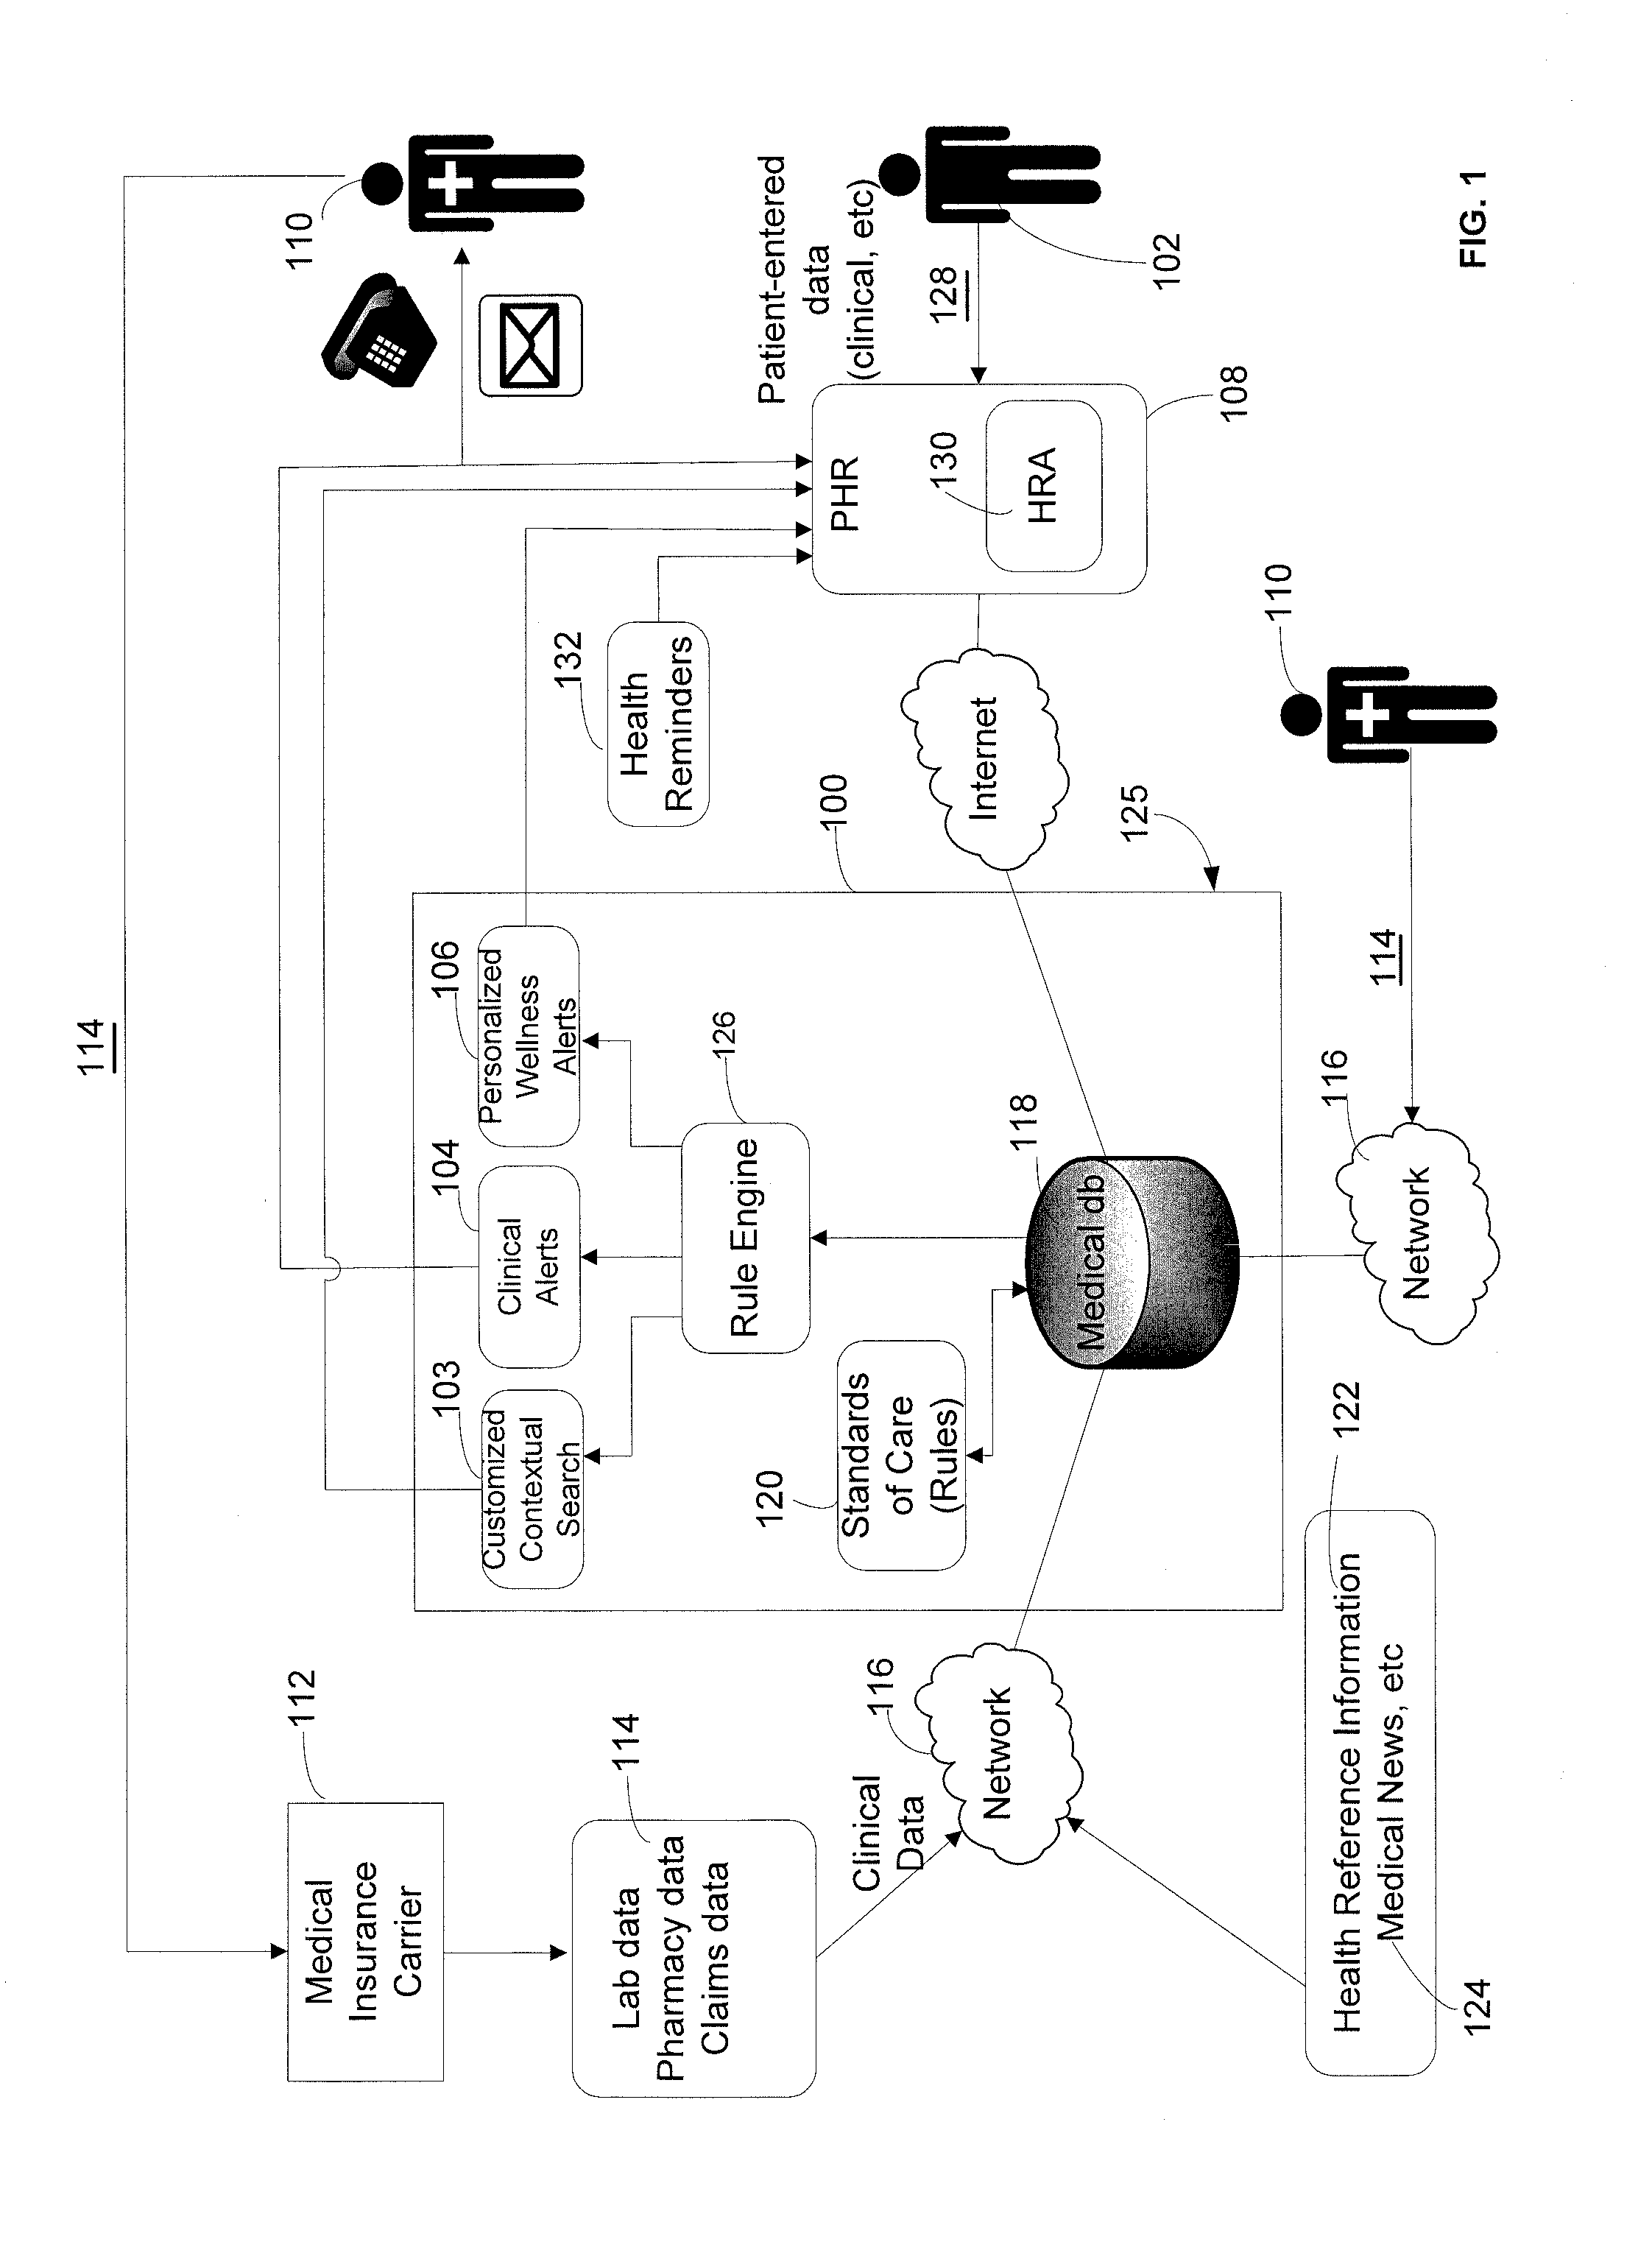 System and method for patient care plan management